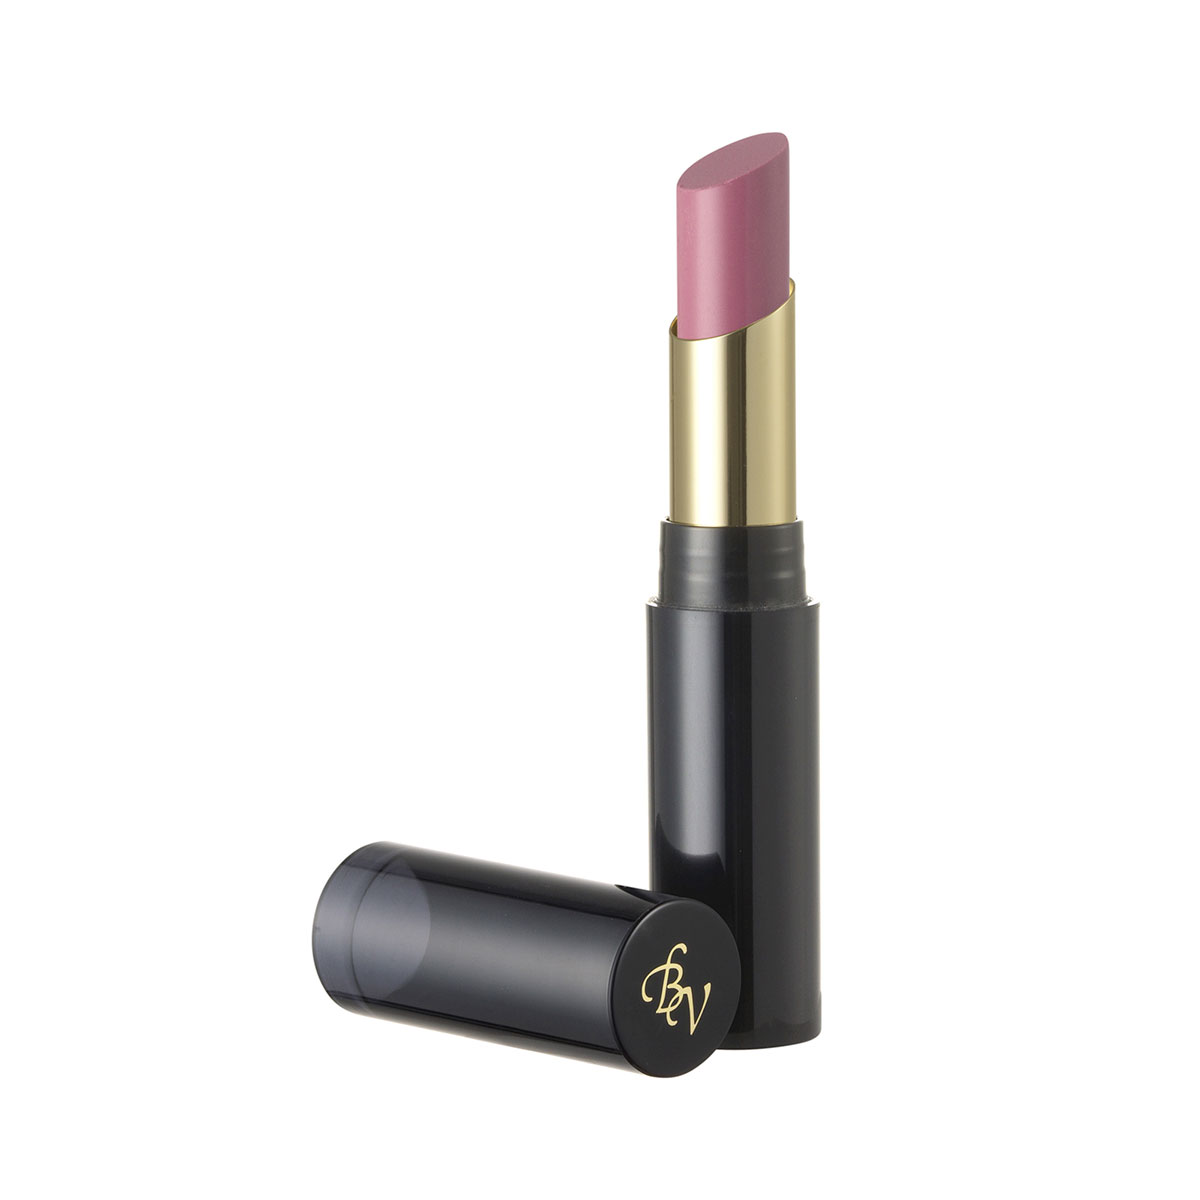 Extra Glossy Lipstick with Shea Butter